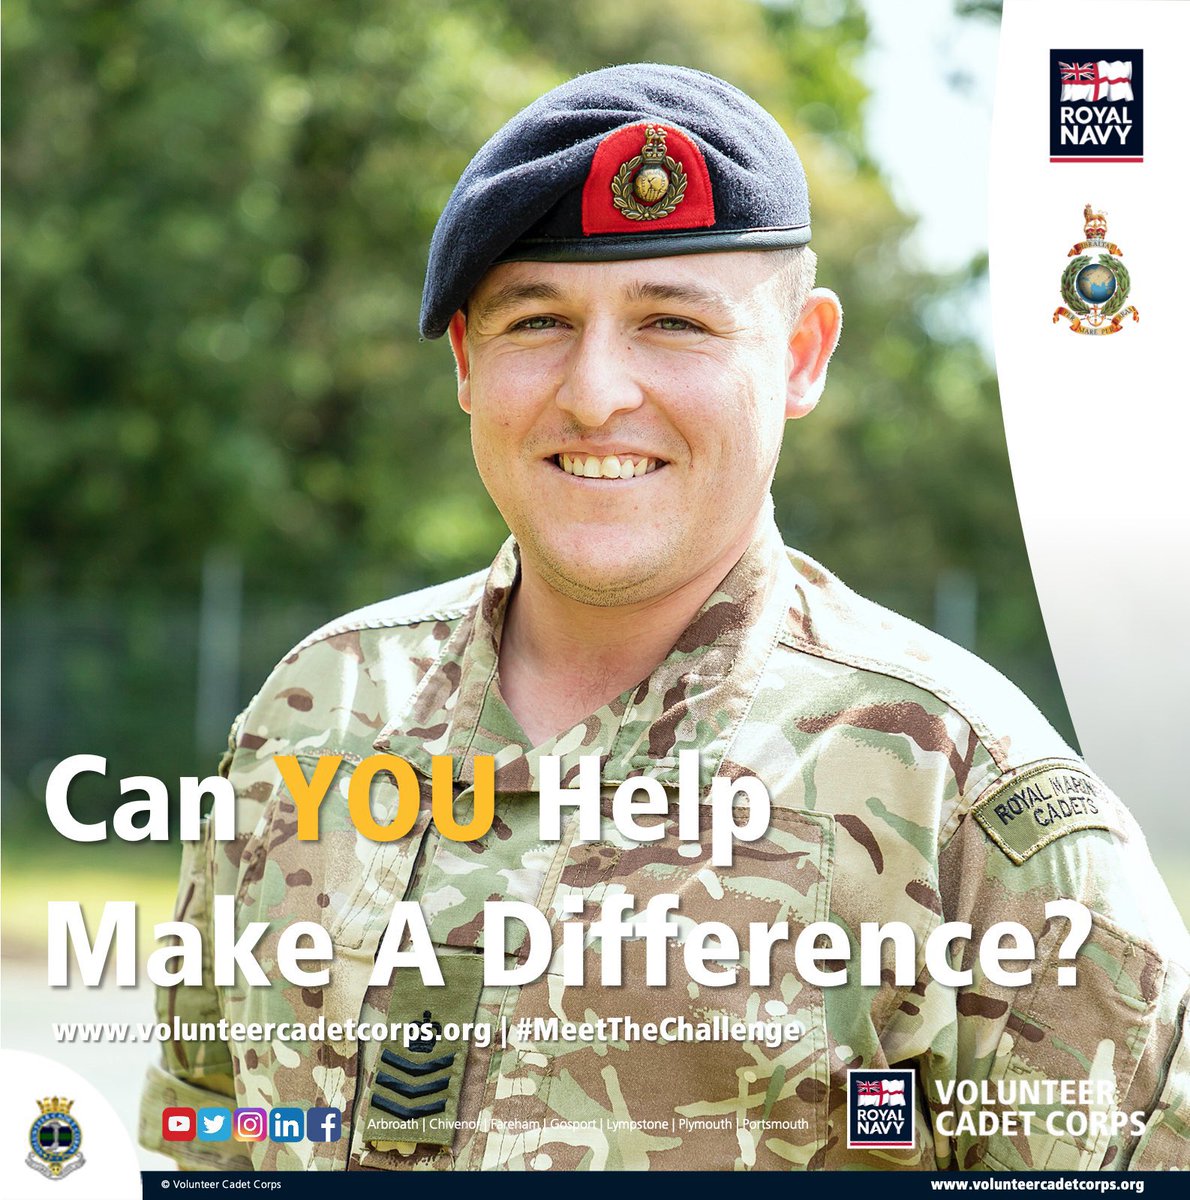 Why not end 2023 by volunteering! We’d love to hear from potential volunteers for your local @VCCcadets Unit! You can help young people make new friends, learn new skills, provide exciting opportunities and much, much more! Find out more at volunteercadetcorps.org